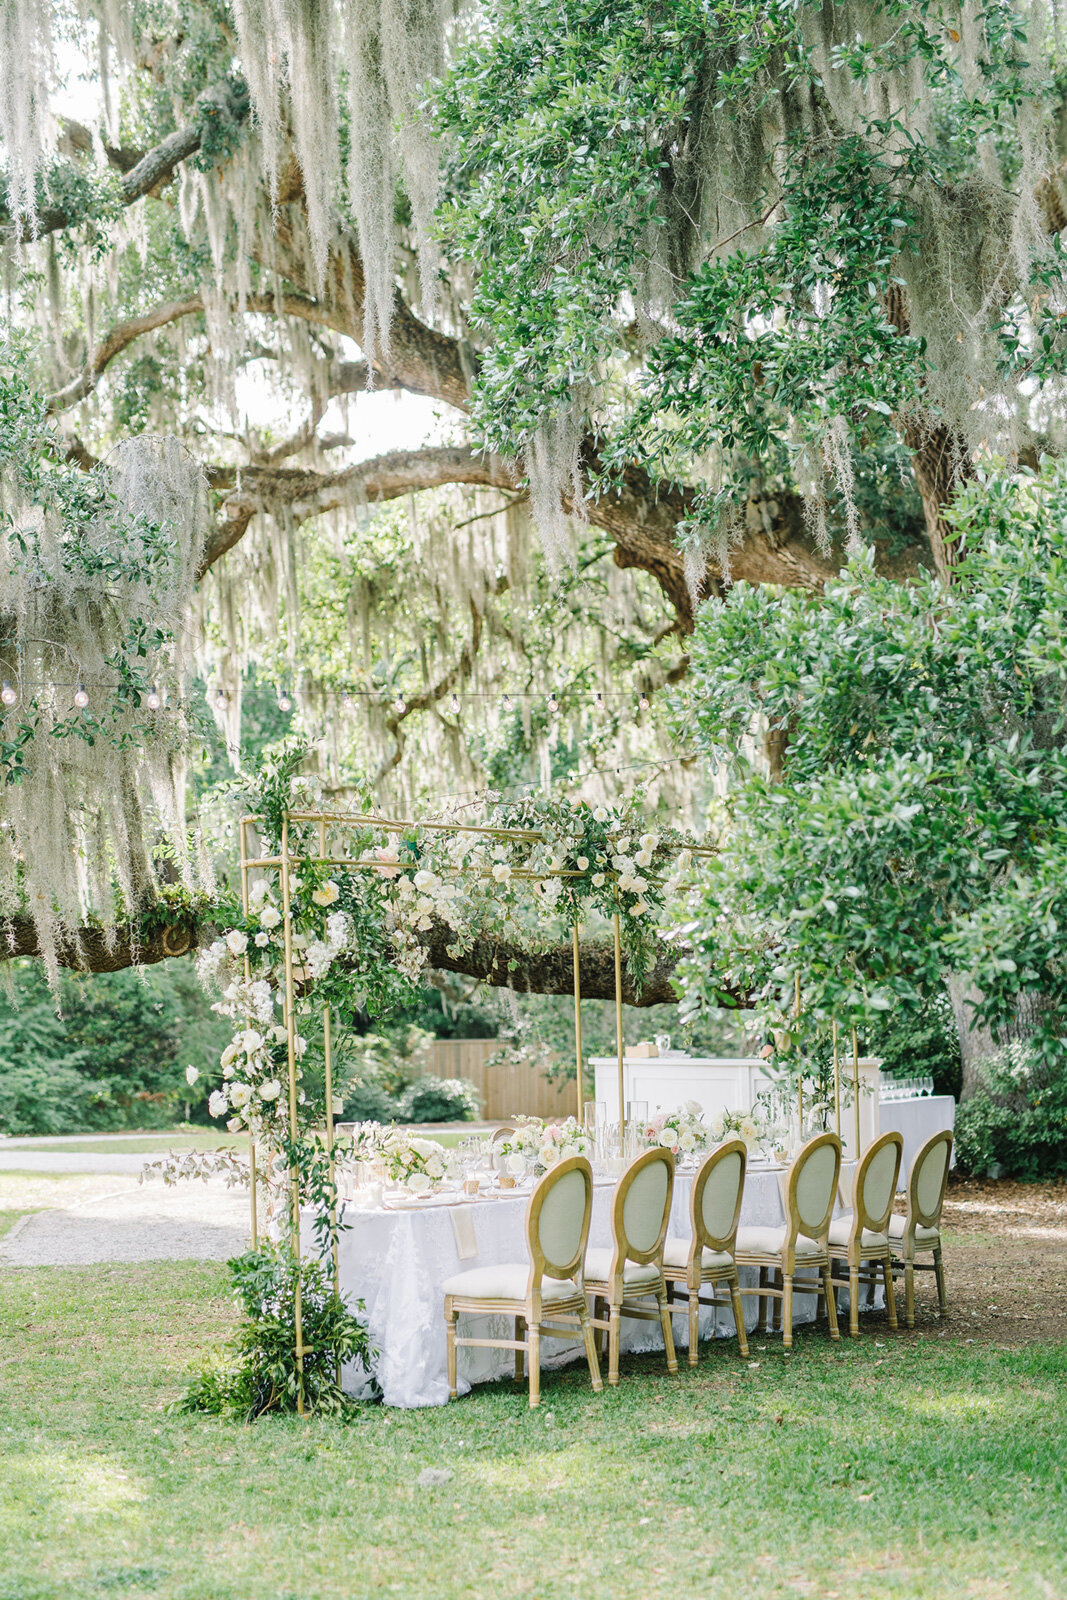 Charleston Elopement Inspiration | Intimate and Romantic Elopements with Styled Elopements ™ by Pure Luxe Bride.